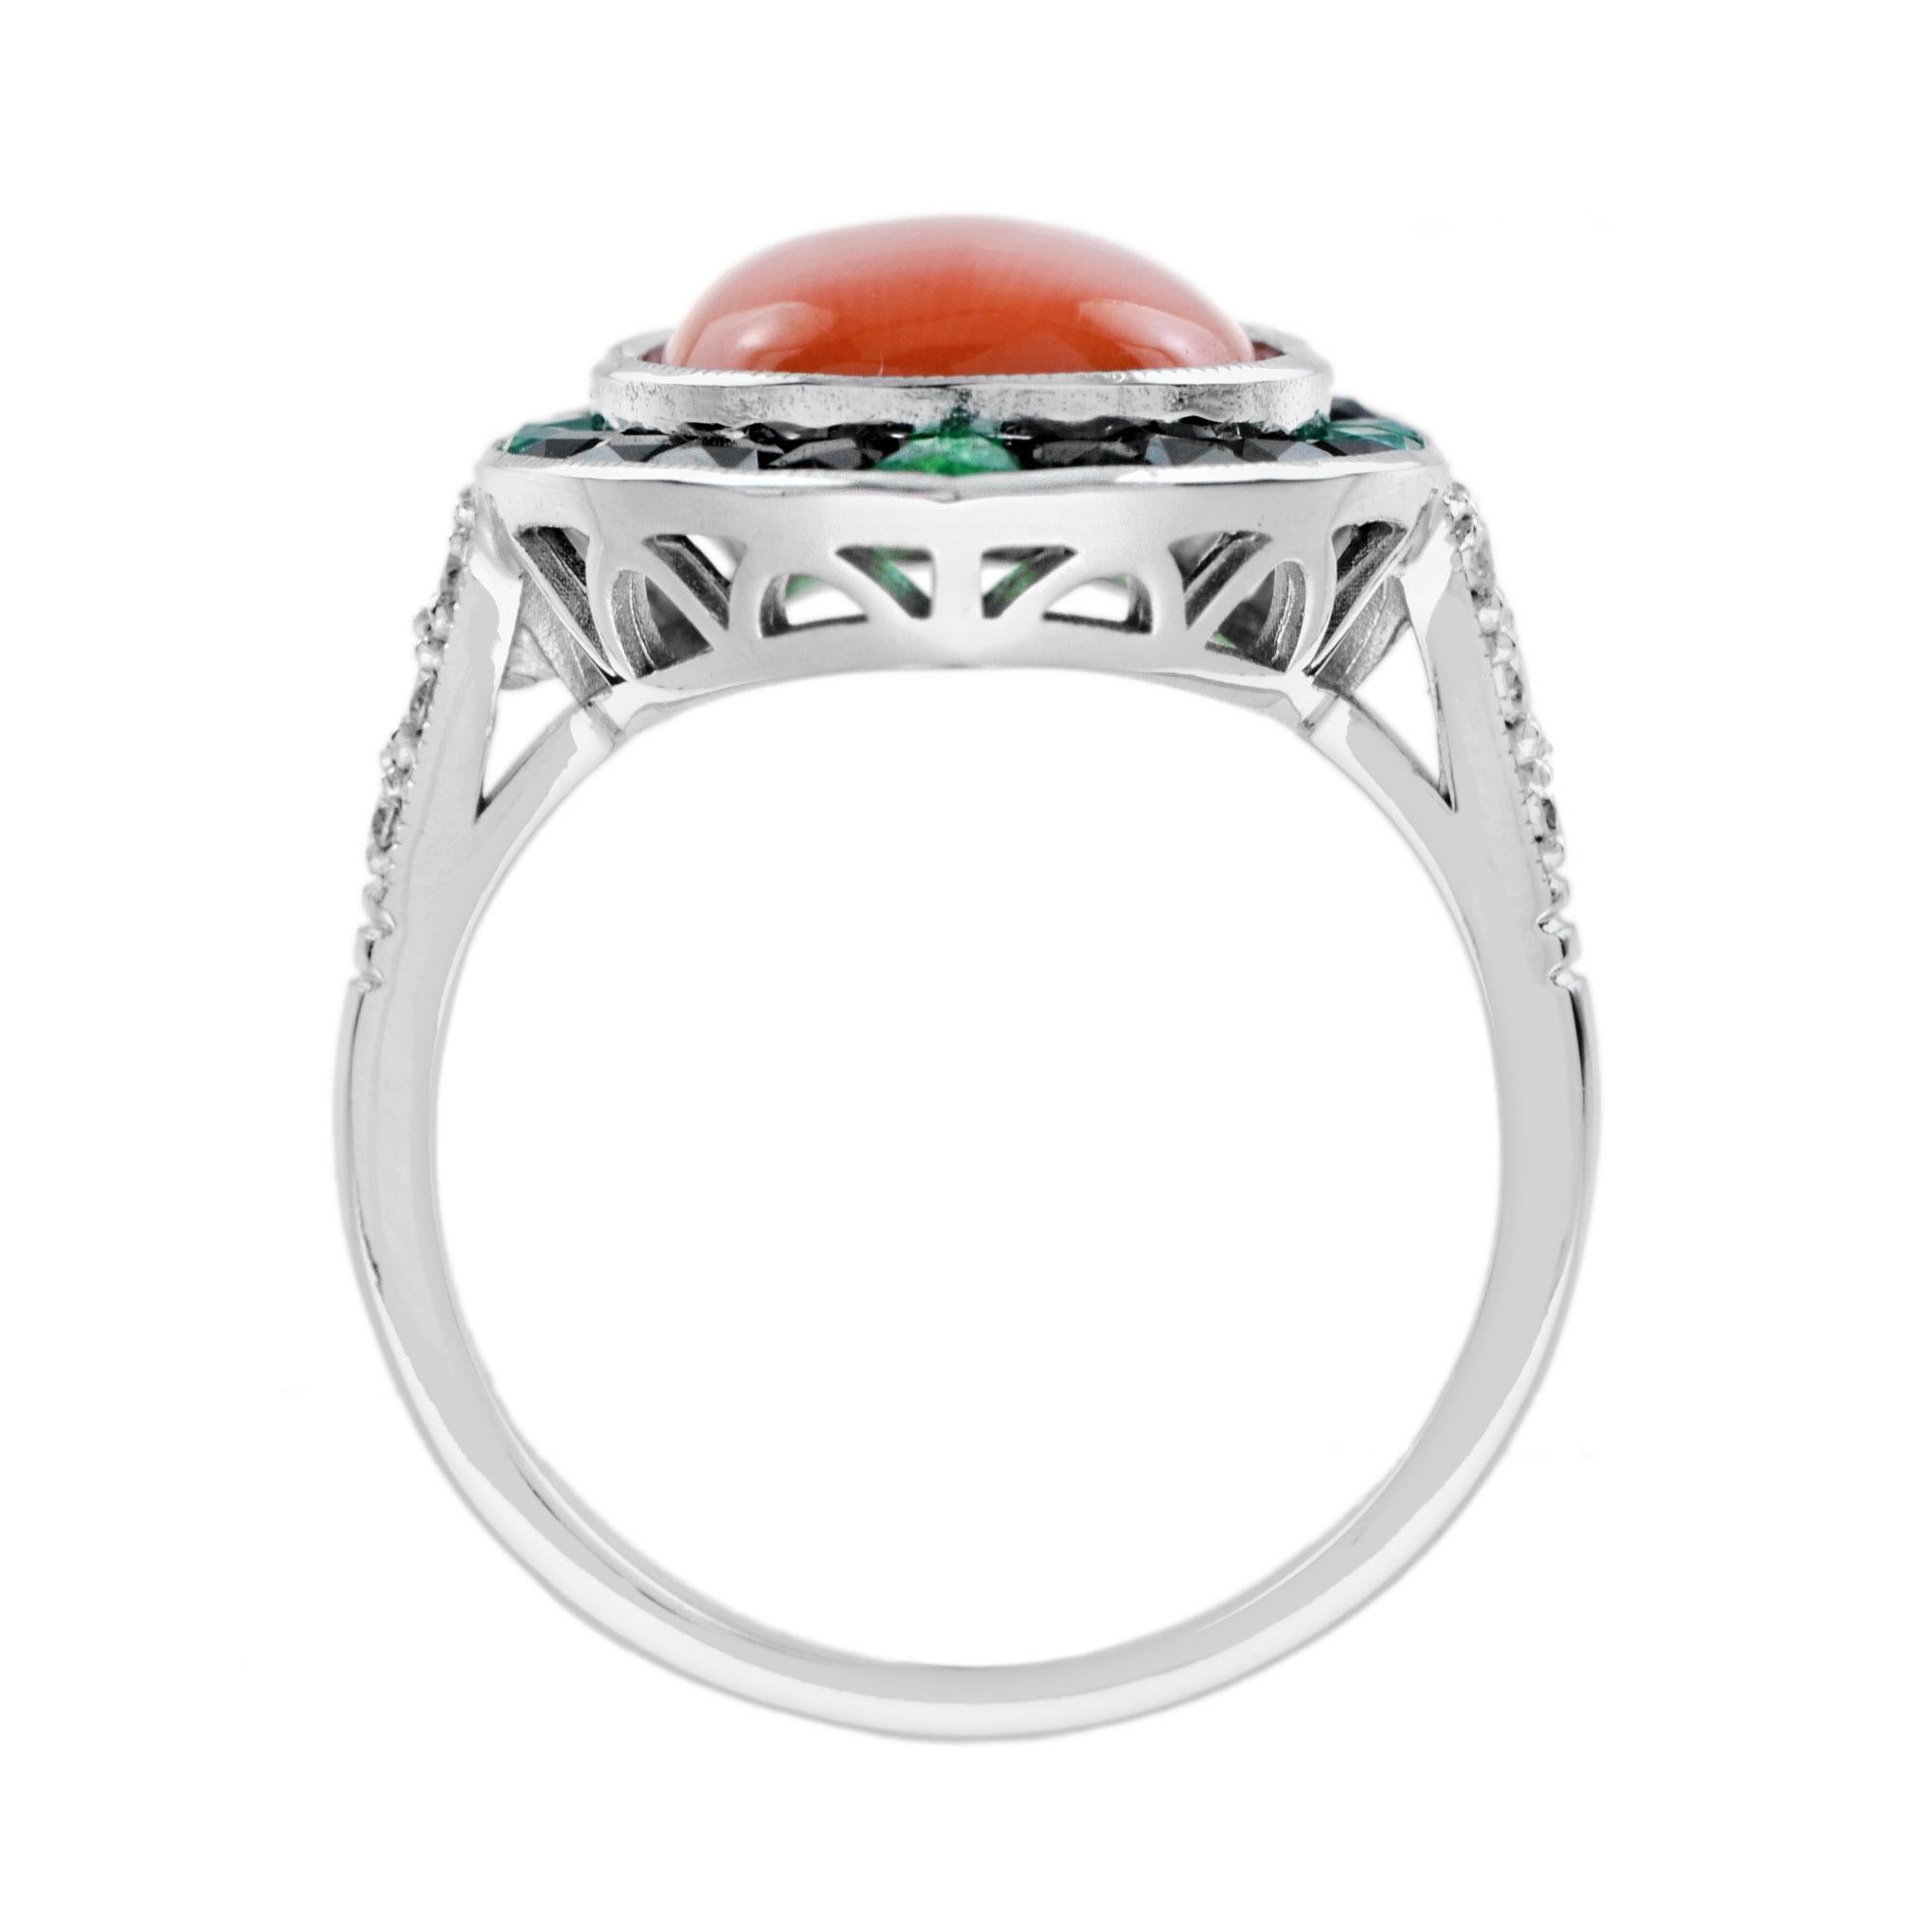 4.05 Ct. Coral Diamond Emerald Onyx Art Deco Style Cocktail Ring in White Gold 3